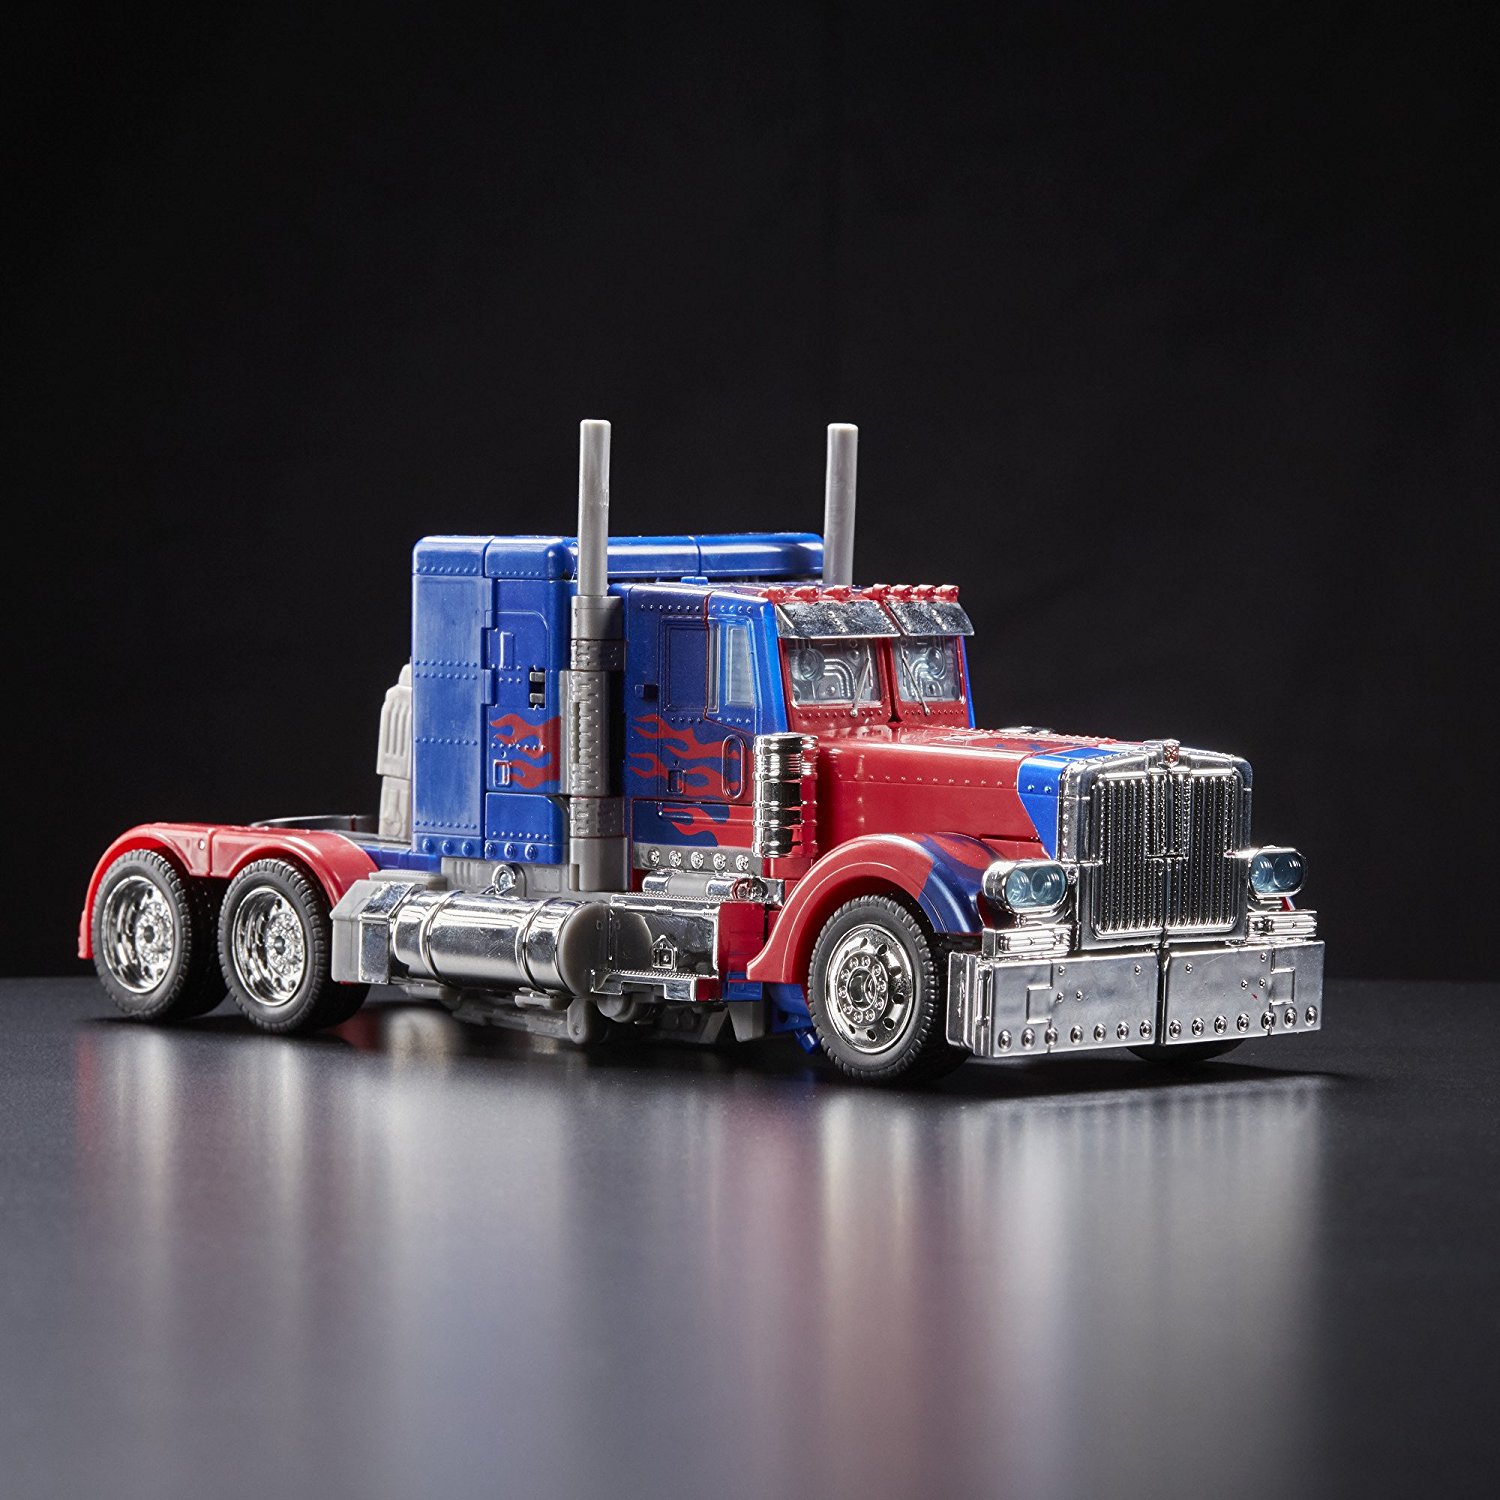 Details about   Transformers Movie Anniversary Edition Optimus Prime 